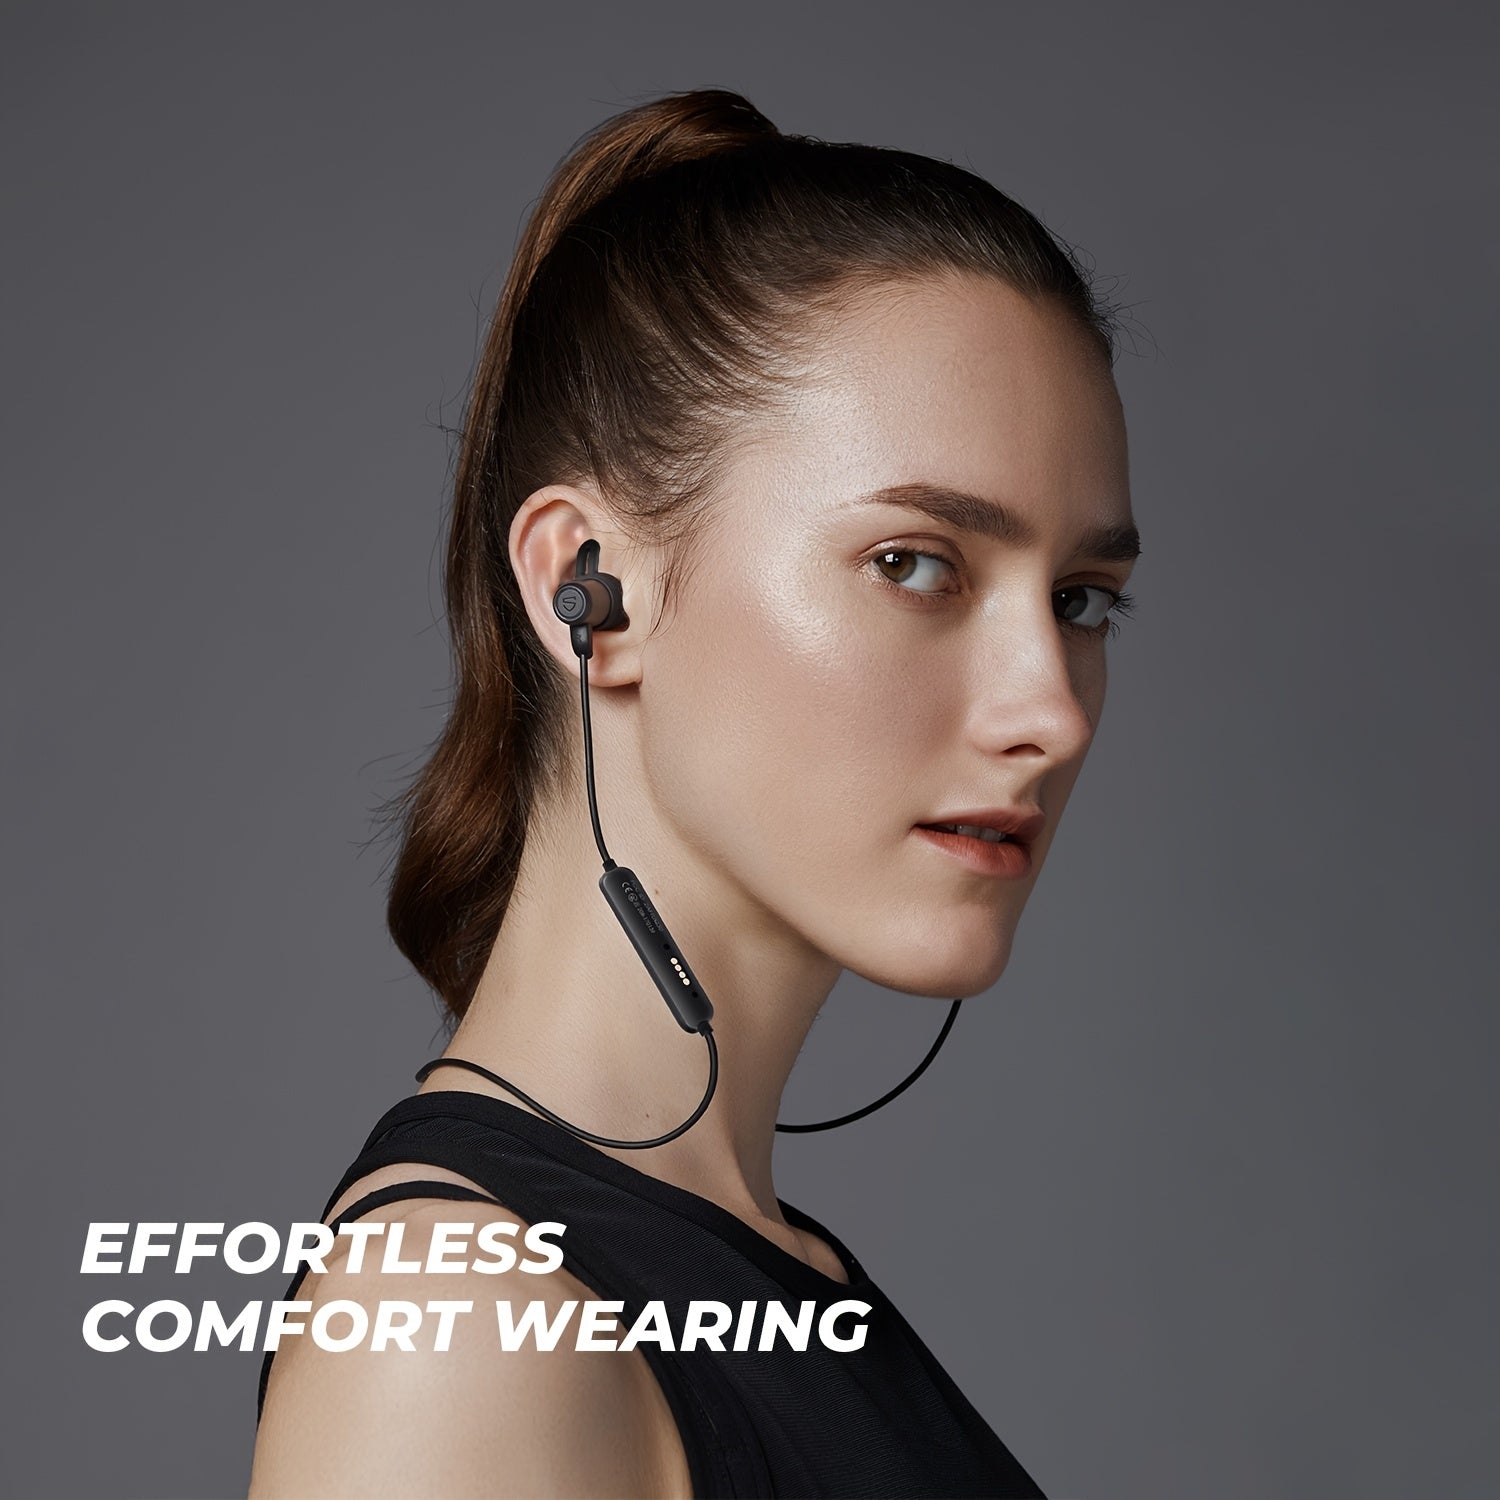 SOUNDPEATS Q35 HD Neckband BT Headphones IPX8 Waterproof Wireless Earphones For Sports In-Ear Stereo BT 5.0 Earbuds With Magnetic Charger Built-in Mic CVC 6.0 14 Hours Playtime